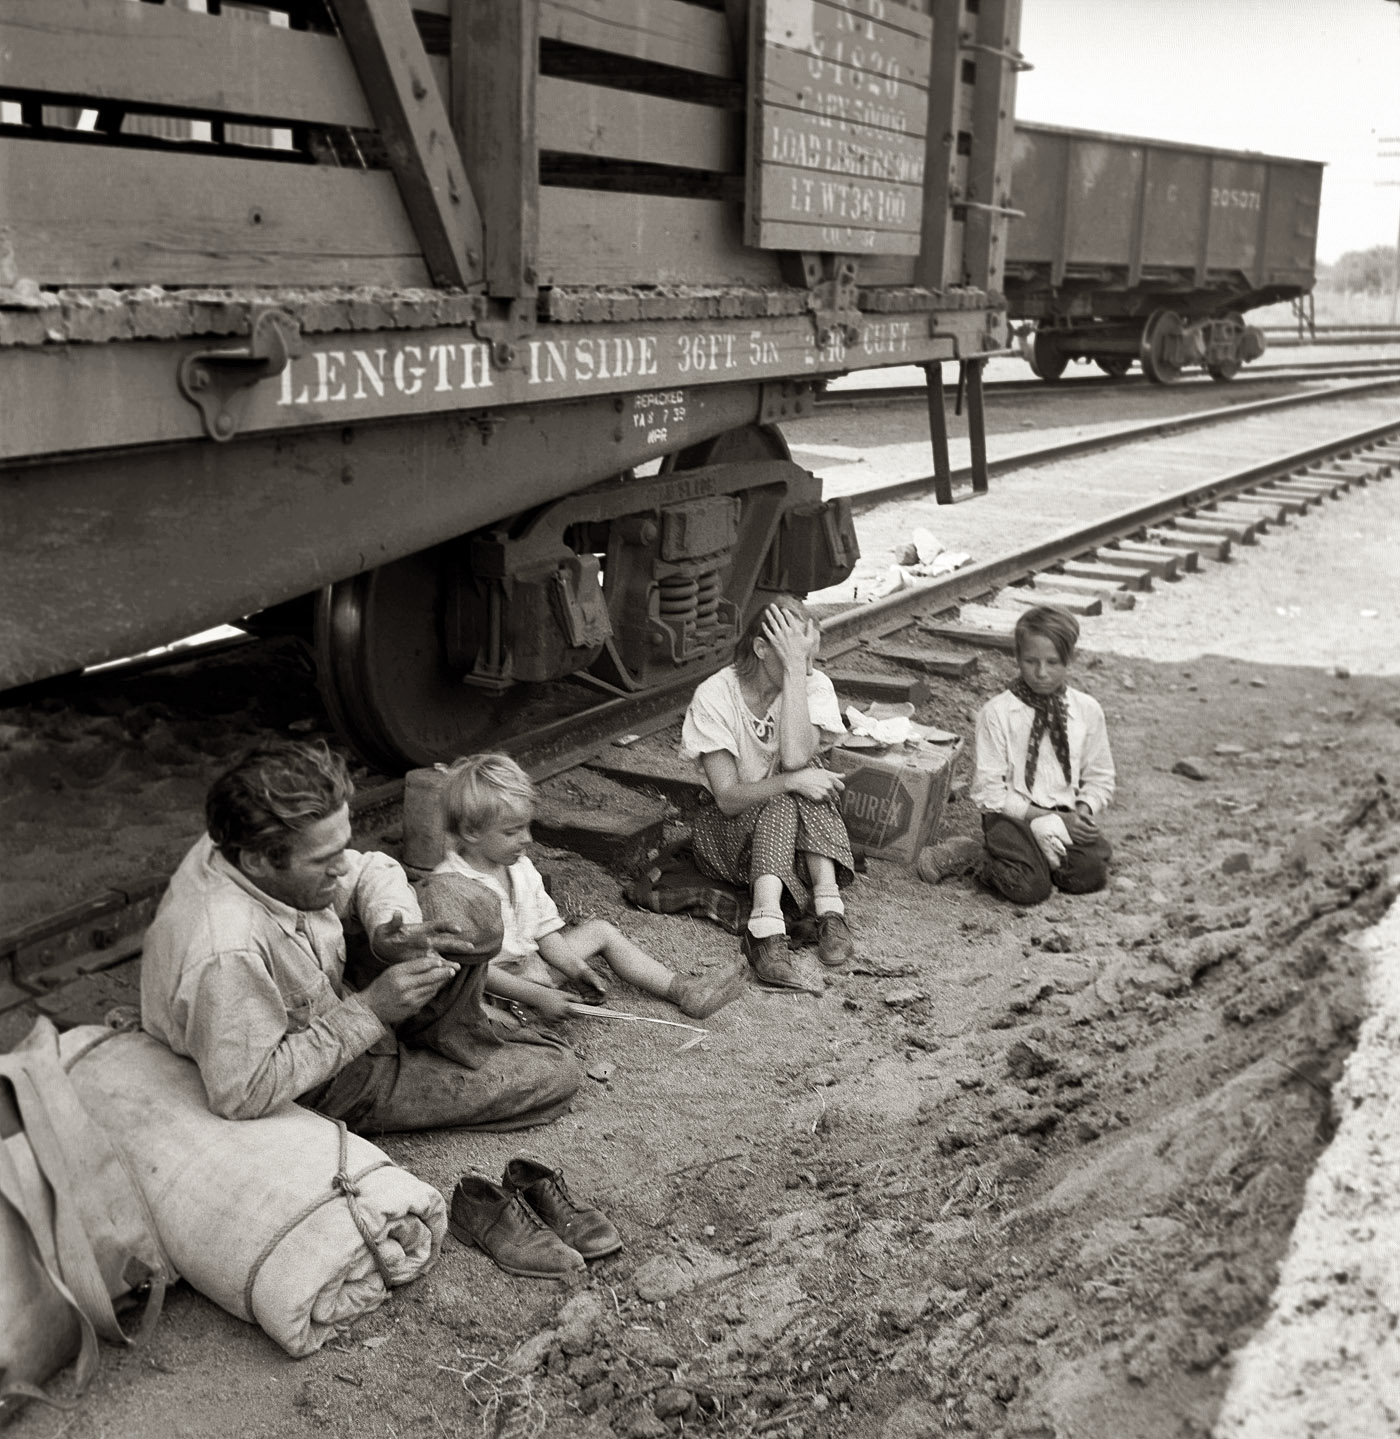 August 1939. Agricultural migrants. "Family who traveled by freight train. Toppenish, Washington. Yakima Valley."  View full size. Medium-format nitrate negative by Dorothea Lange for the Farm Security Administration.